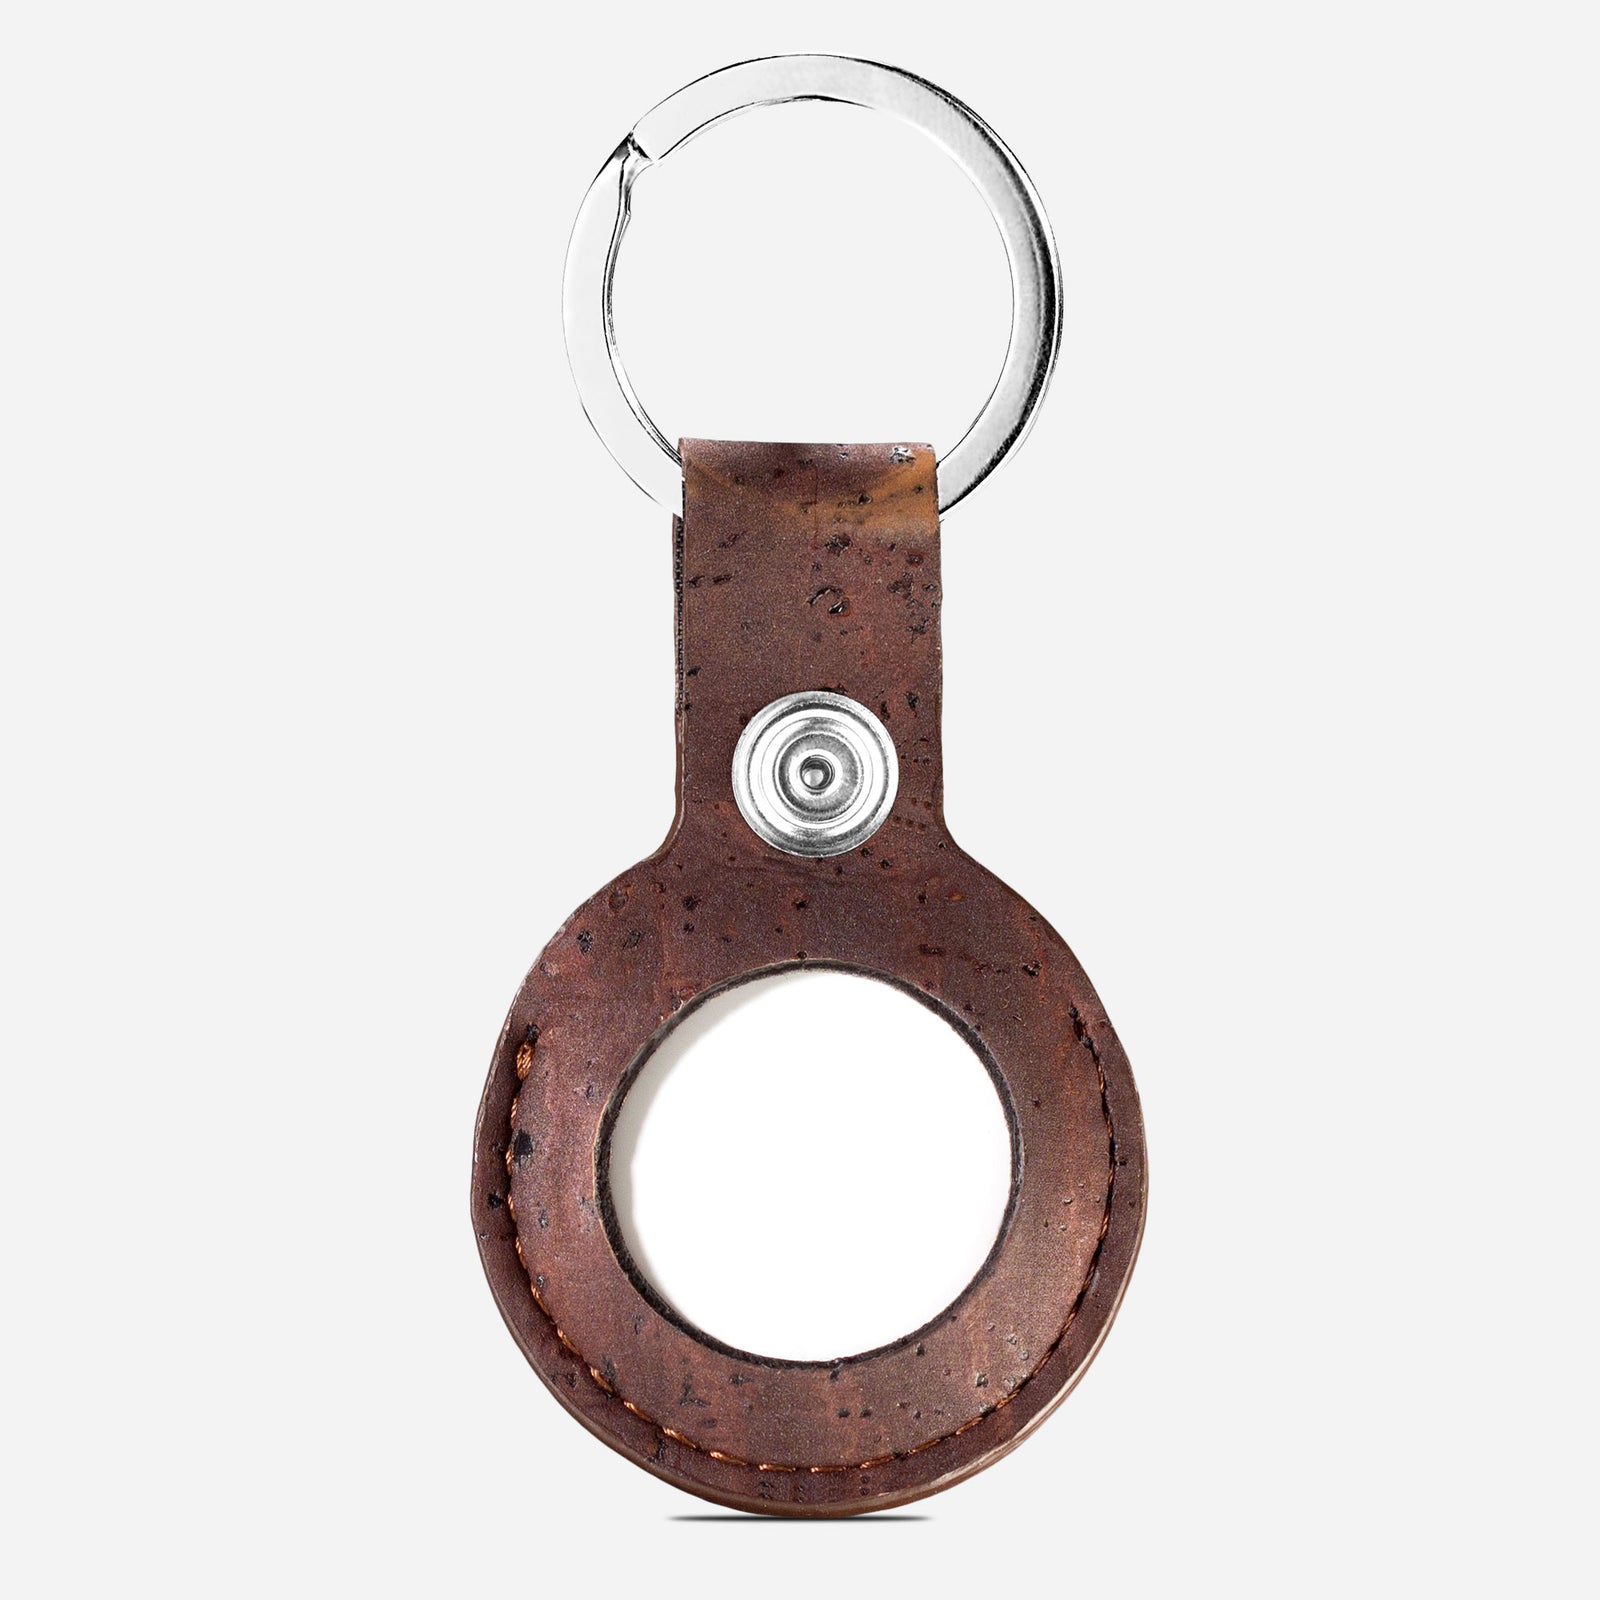 Corkor Cork Airtag Keychain for Apple - Stylish and Eco-Friendly Accessory